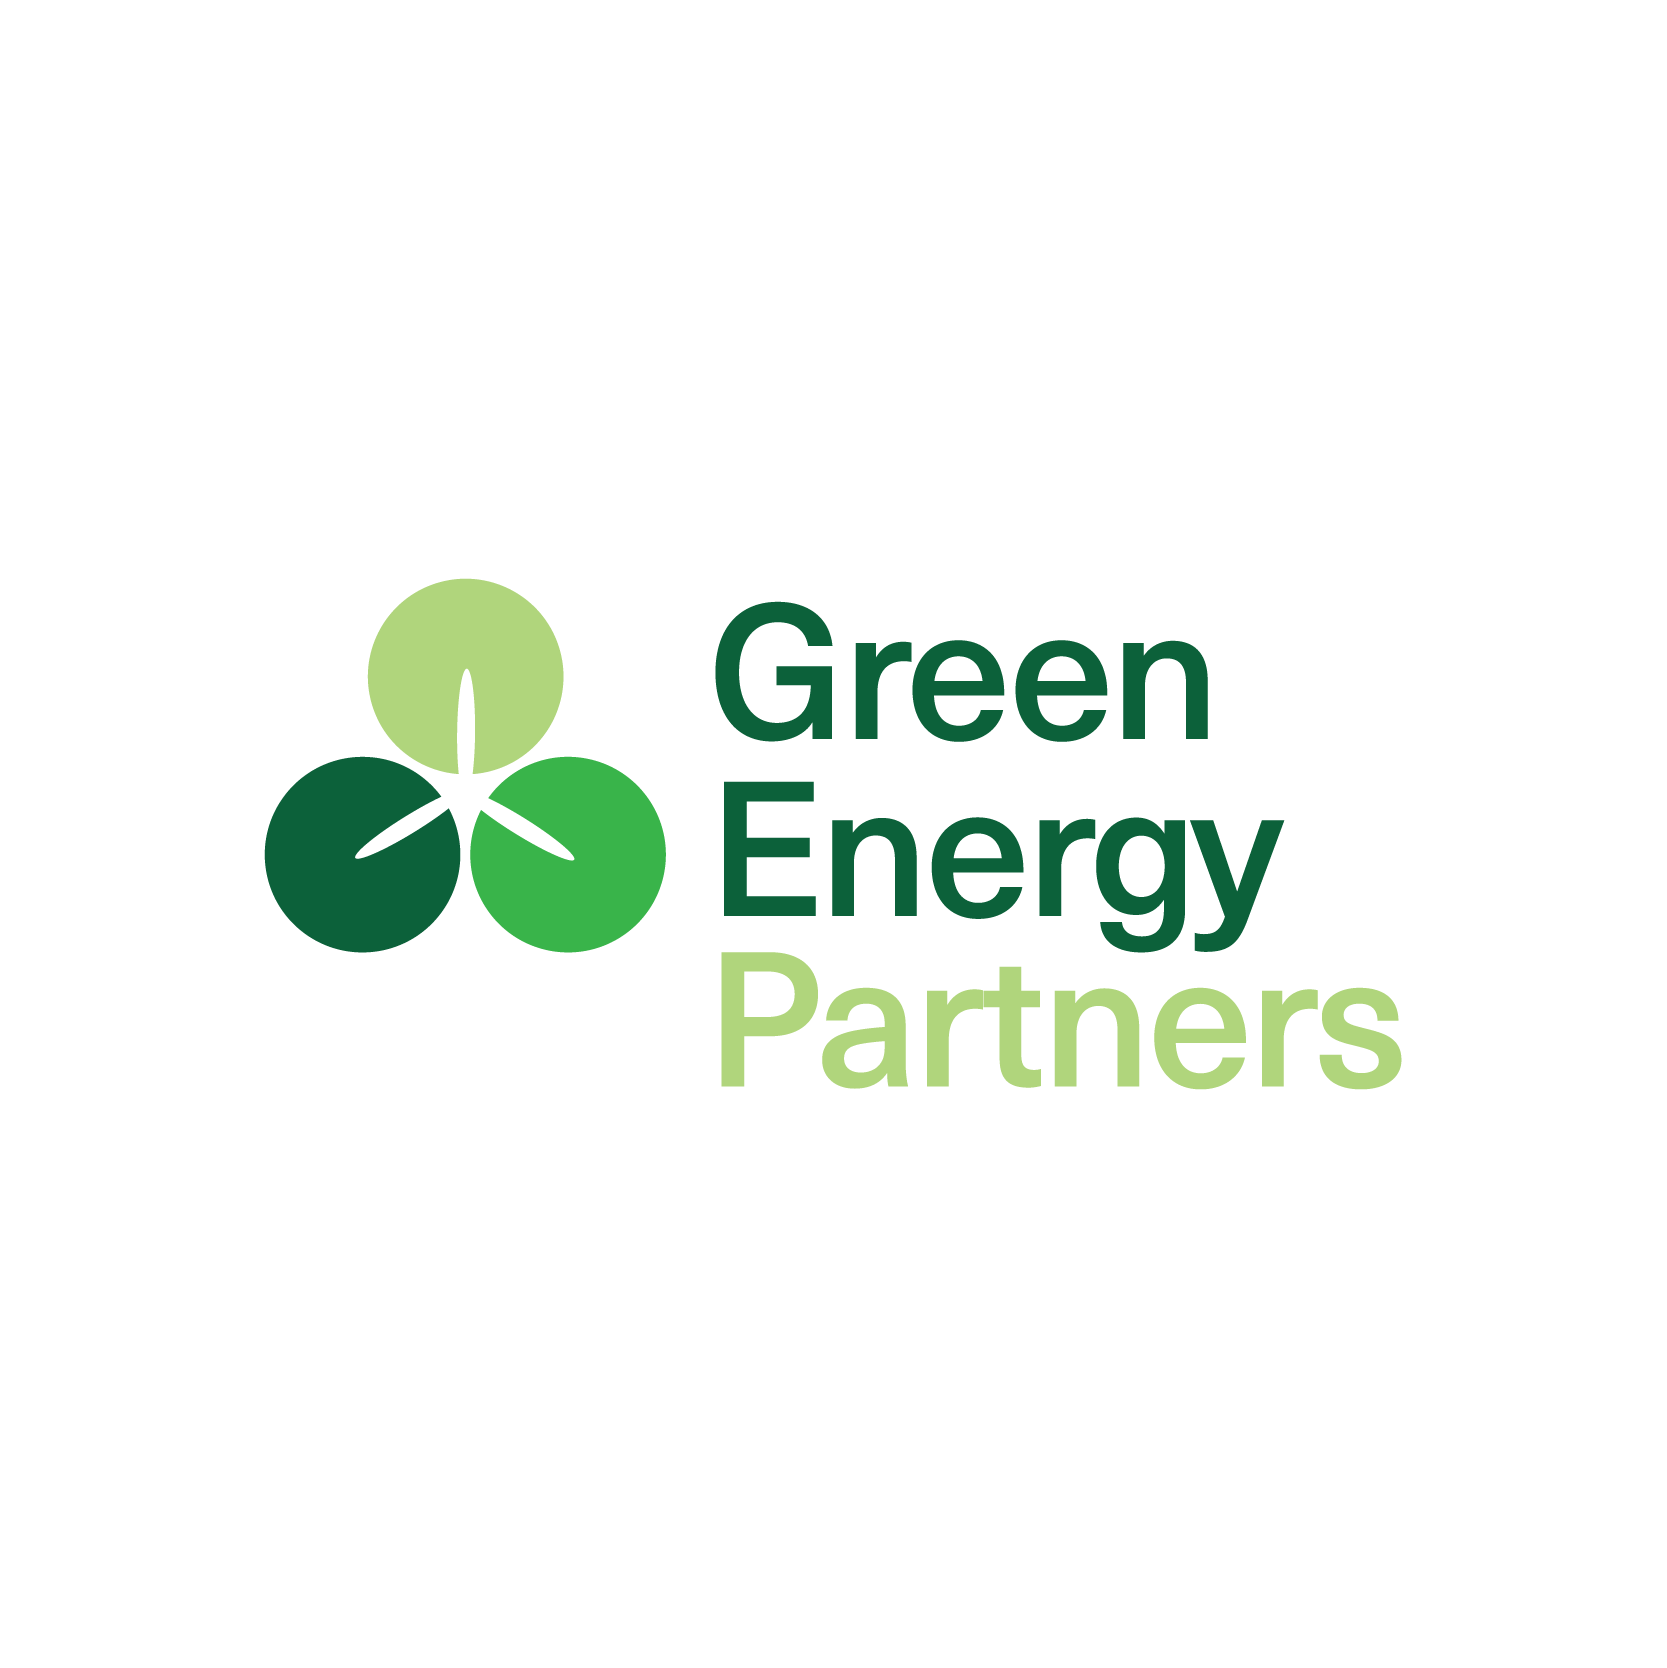 The Role of Partnerships in Green Energy